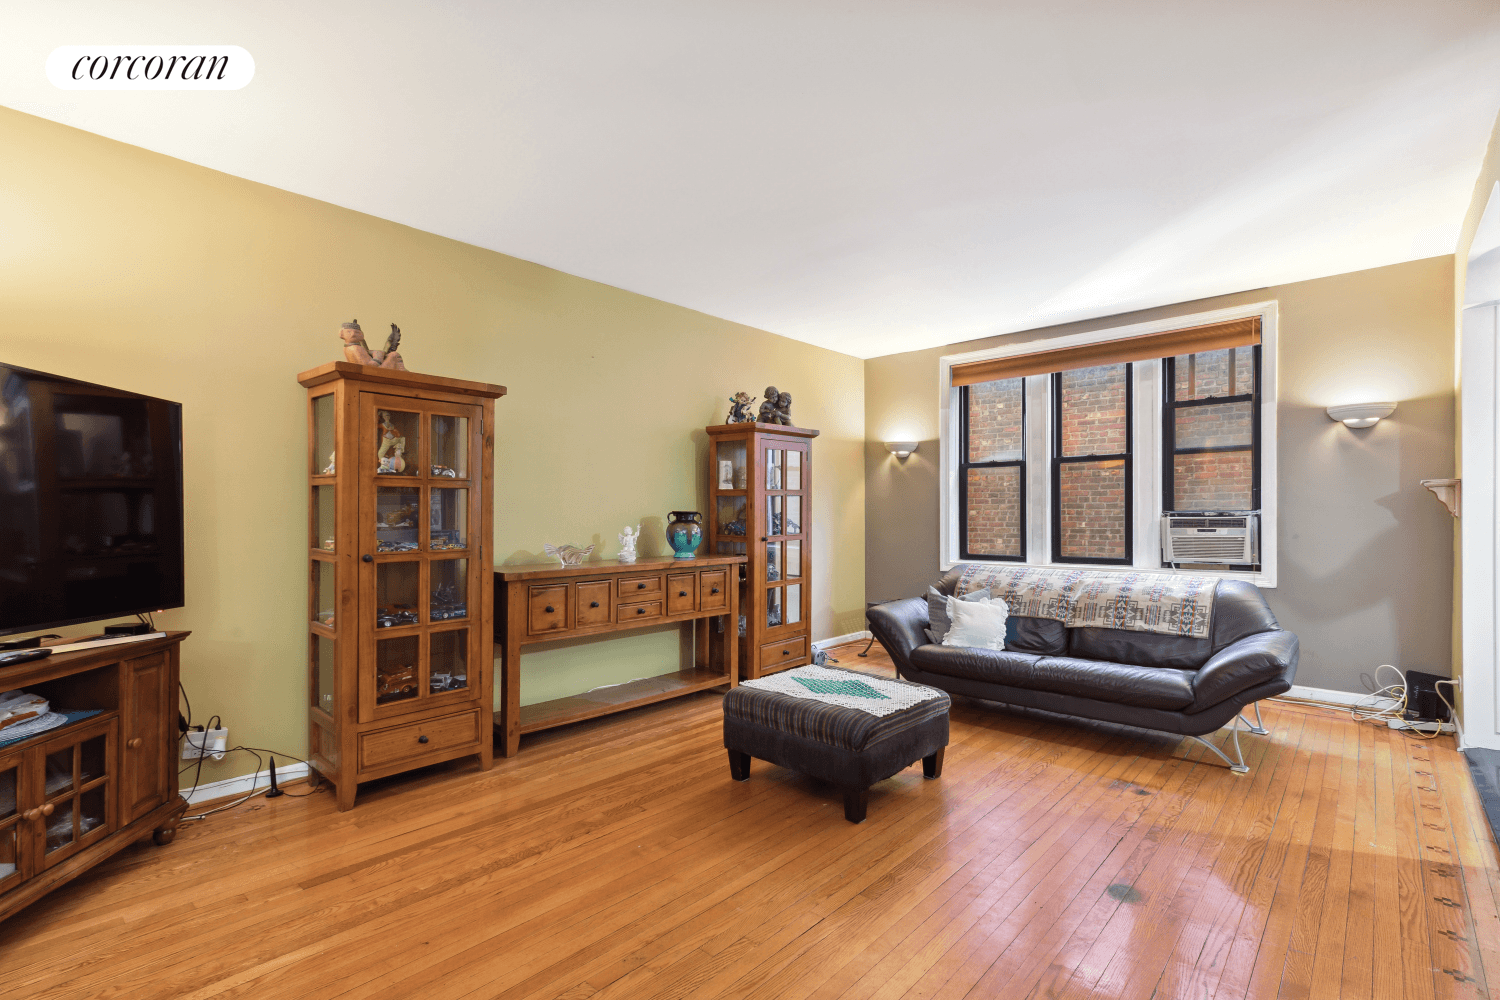 Welcome home to this oversized 2 bedroom, 1 bathroom at The Wallington in the heart of Elmhurst Queens.